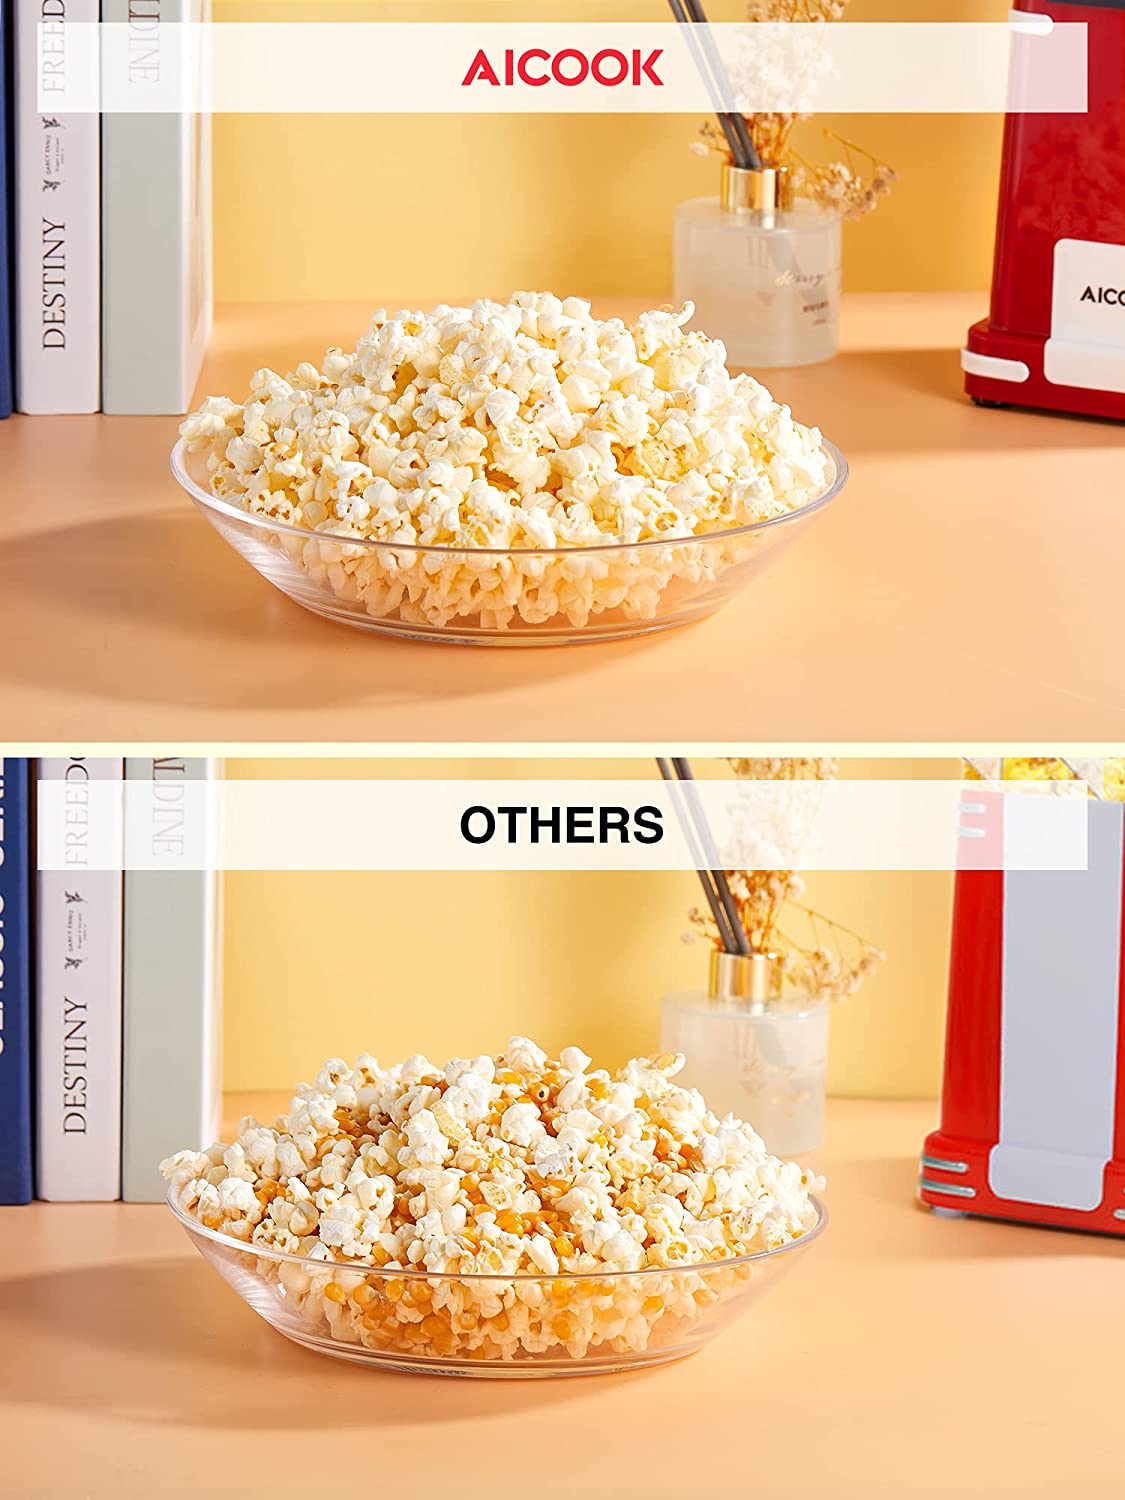 AICOOK Hot Air Popcorn Popper, 1400W, Popcorn Maker With Measuring Cup